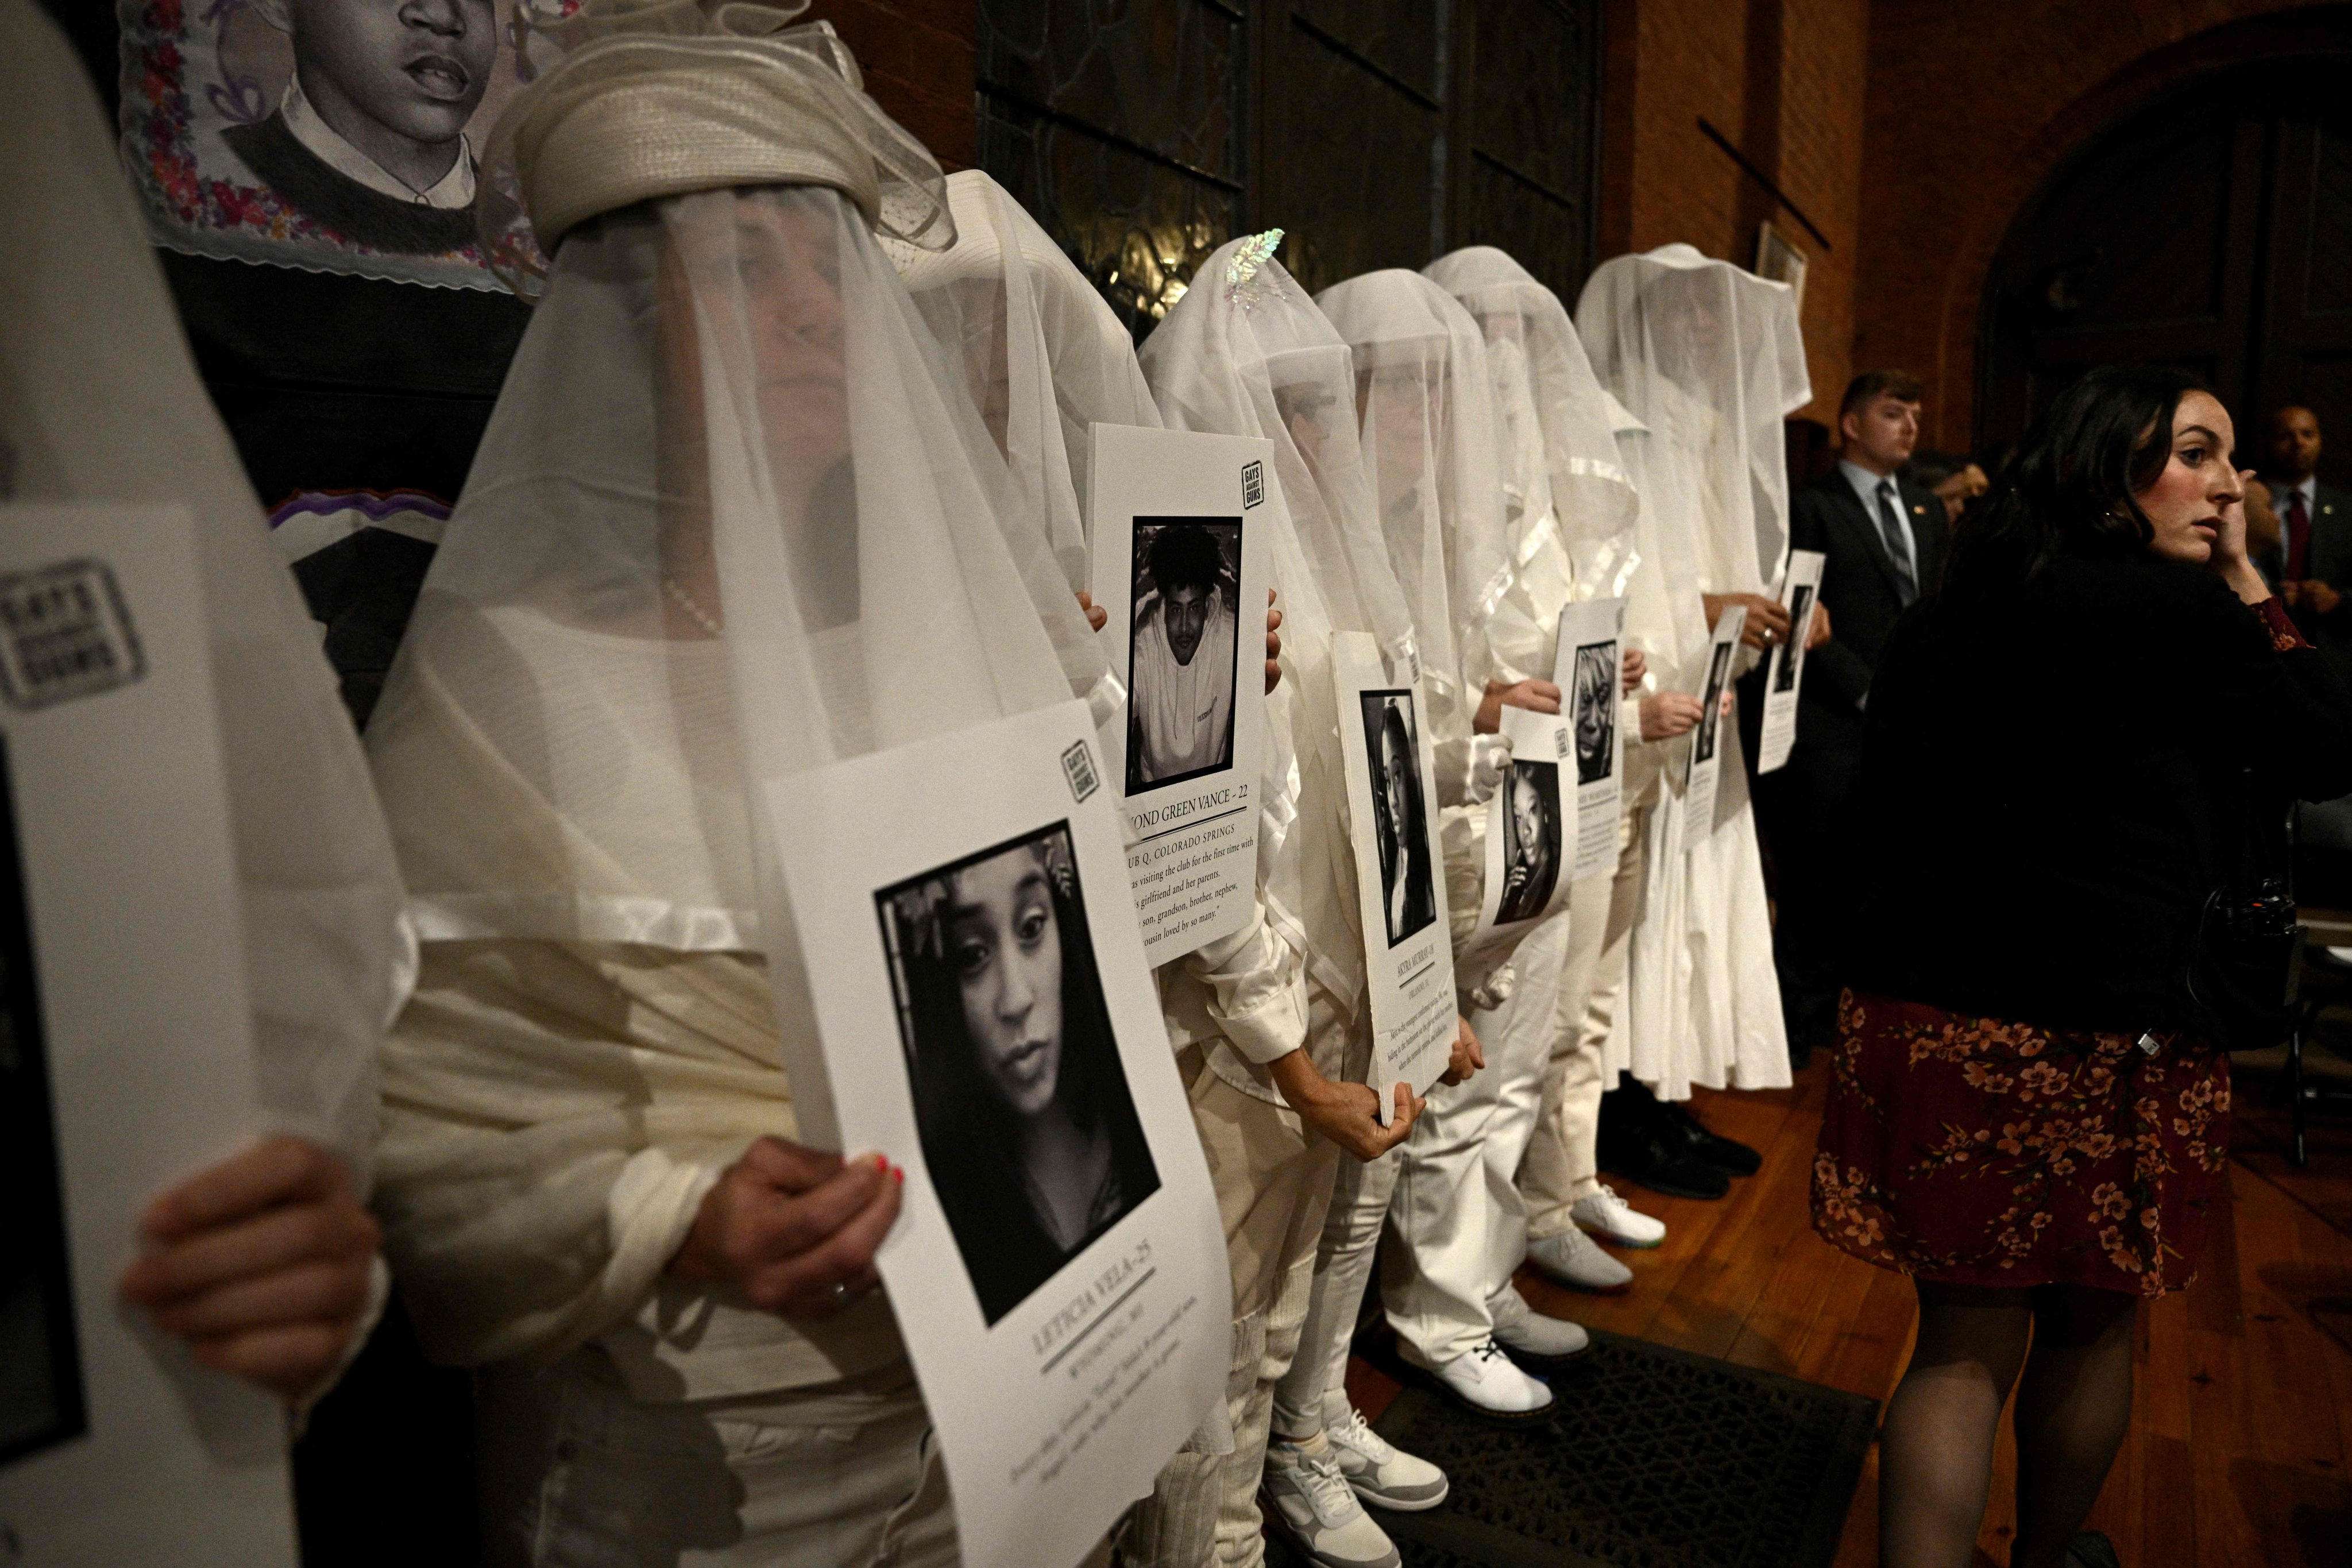 Attendees hold images of victims of gun violence at a vigil on Wednesday. Photo: AFP